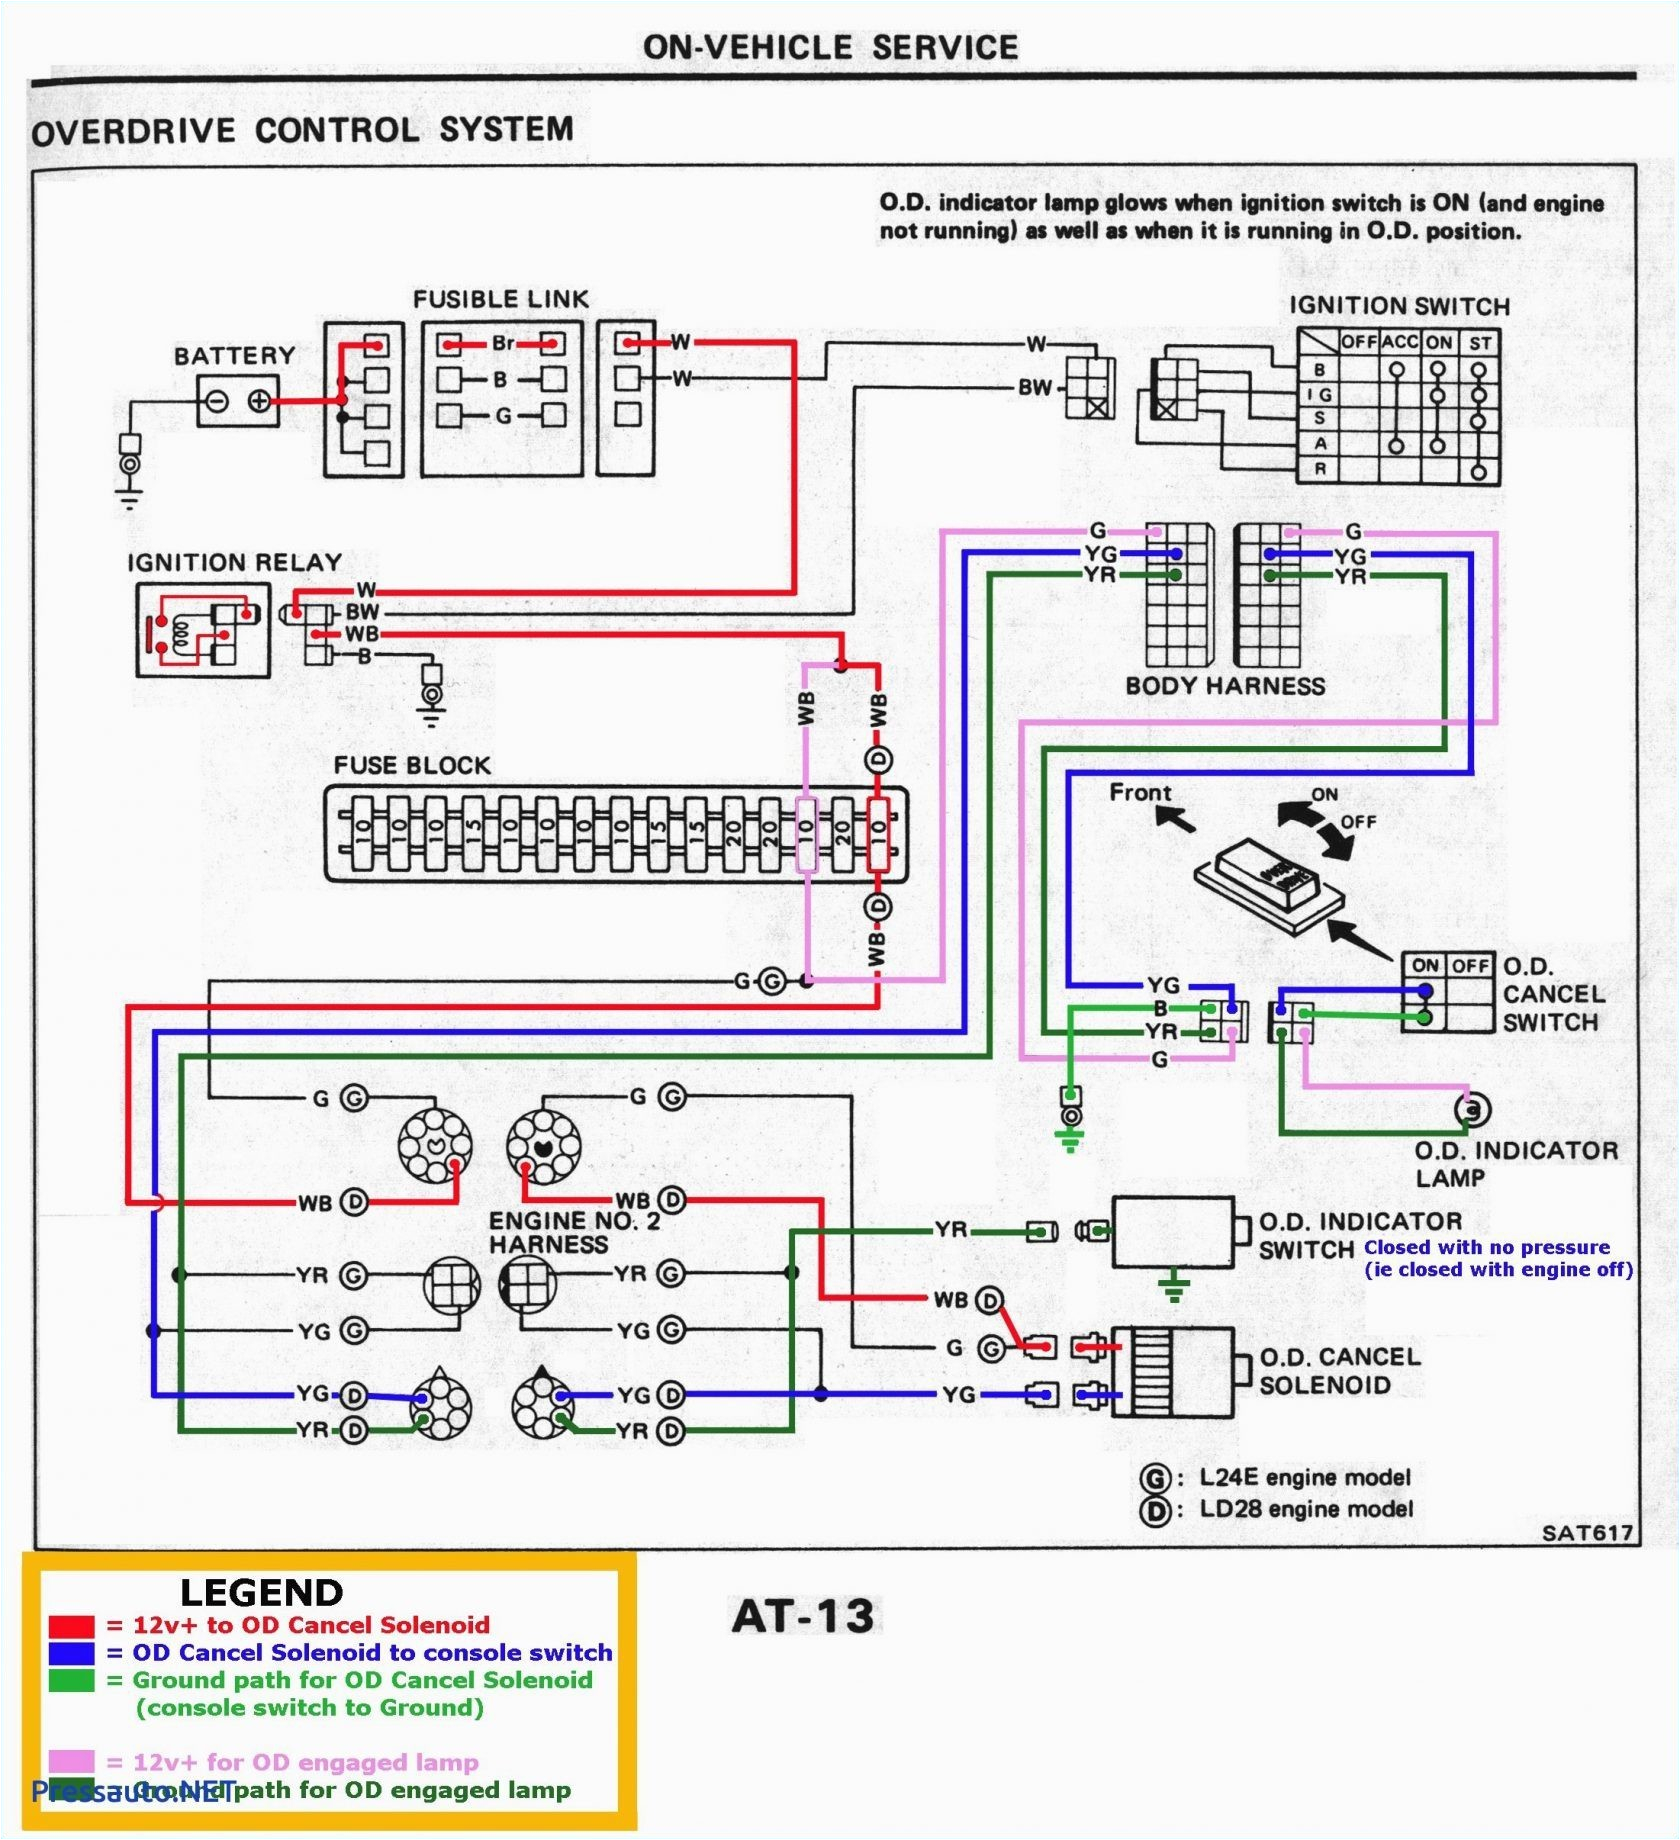 truck wiring harness for trailer wiring diagram today1995 nissan pick up trailer wiring harness wiring diagram